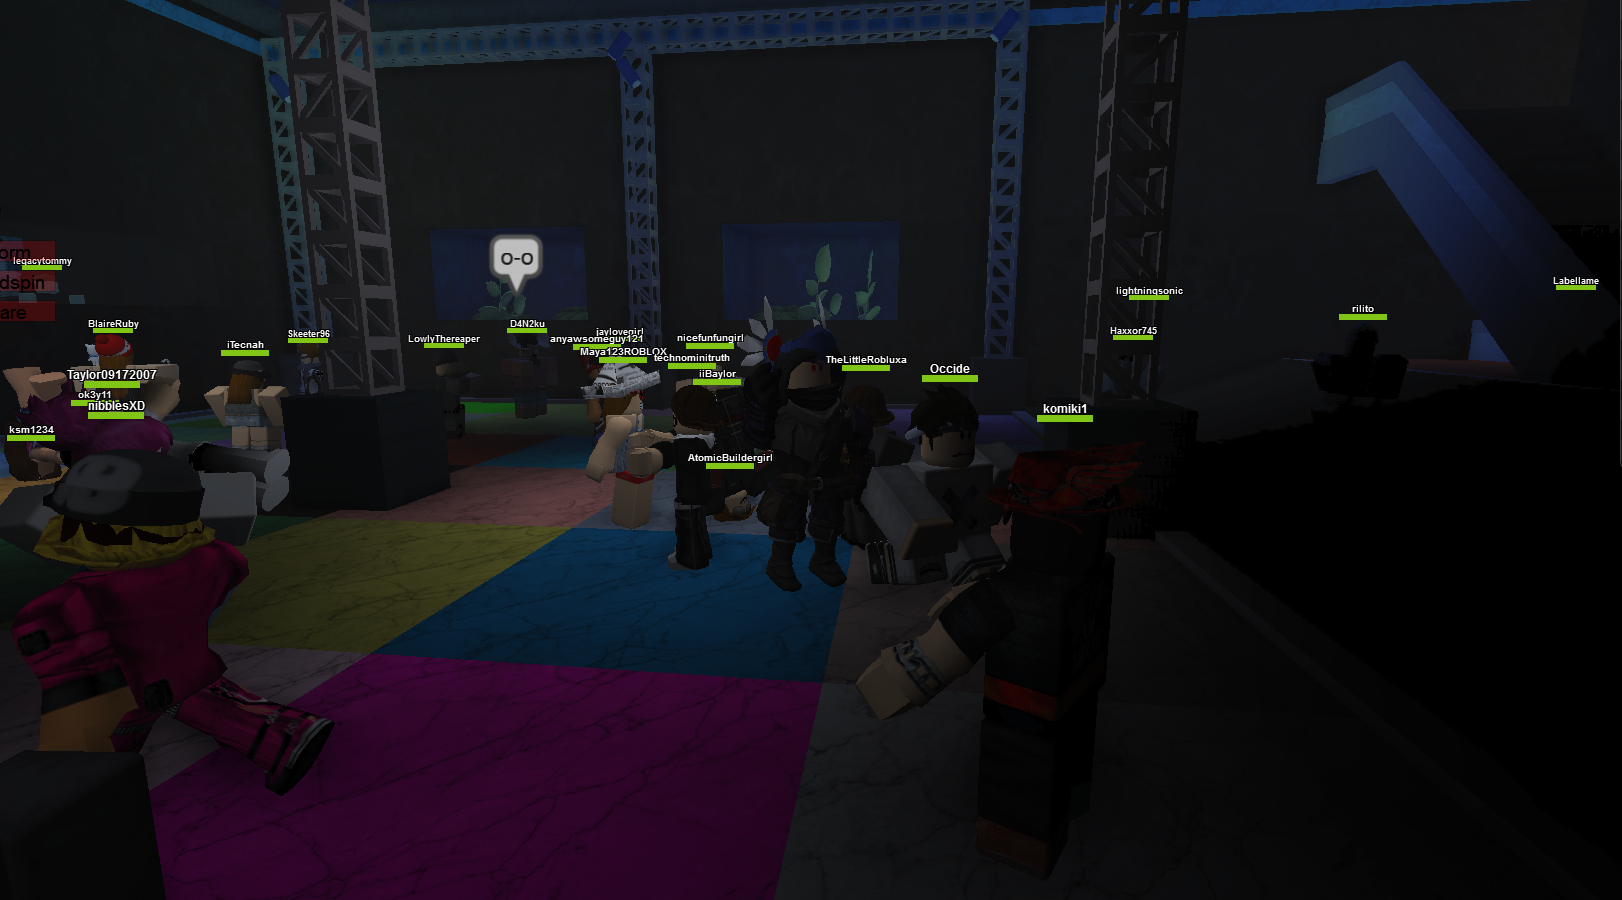 Club Boates Showcases The Power Of Animation Roblox Blog - club boates showcases the power of animation roblox blog